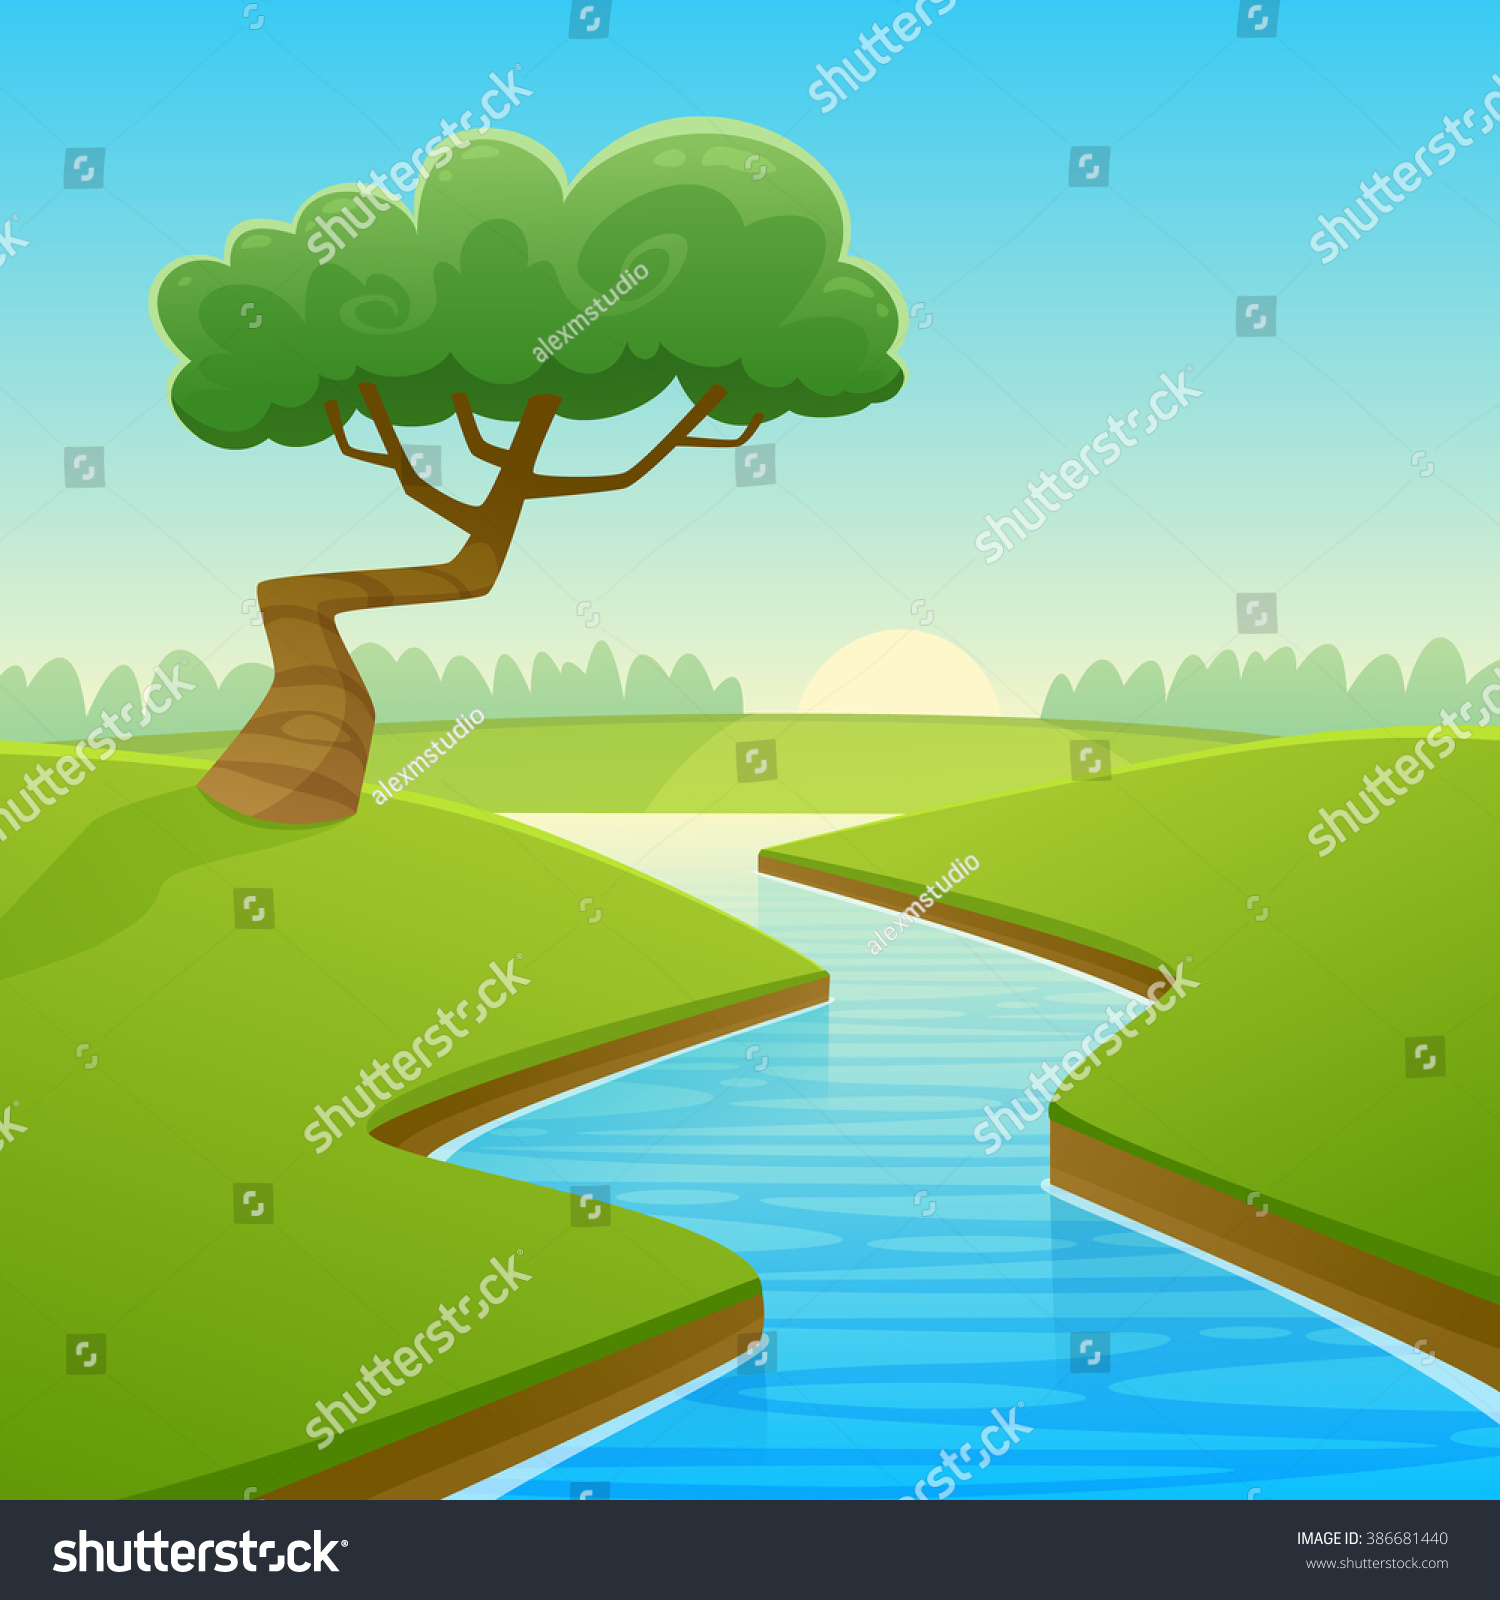 river animated clipart - photo #49